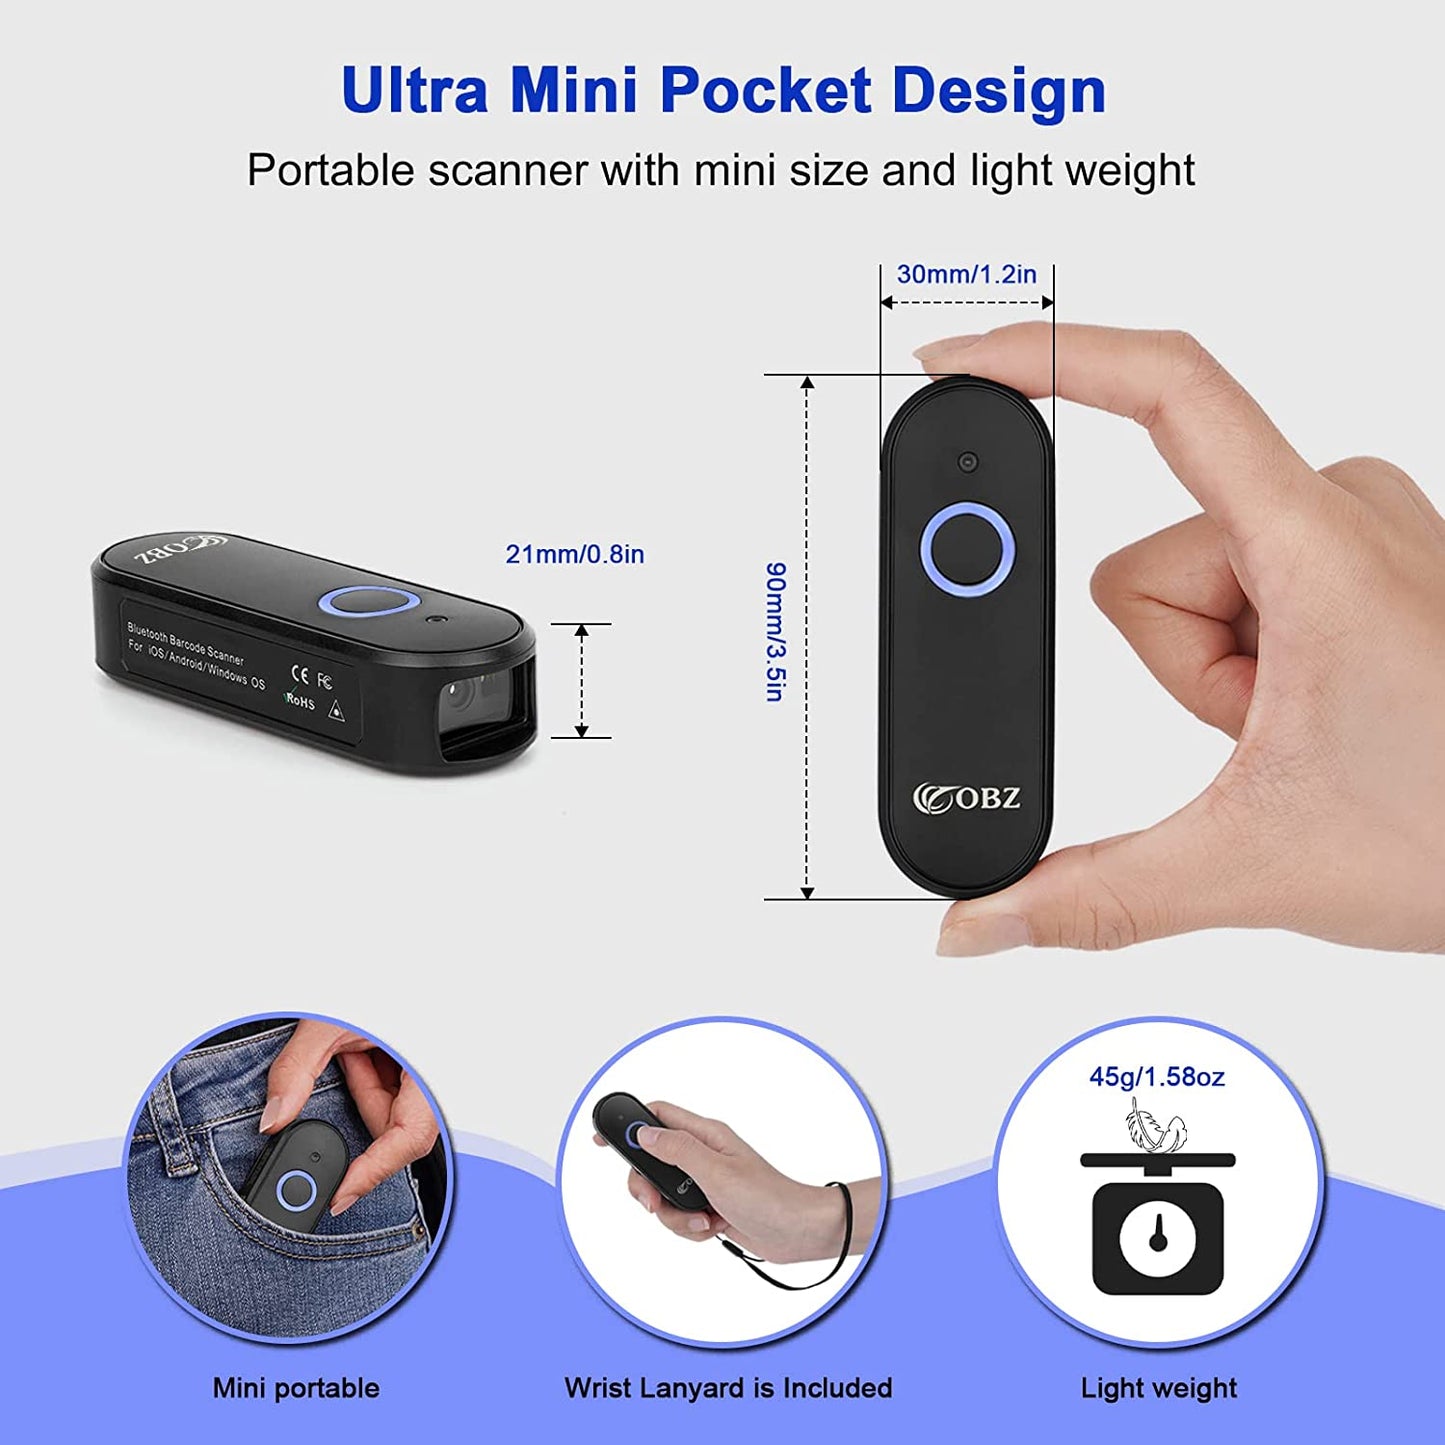 Portable Mini 2D Wireless Barcode Scanner - 2.4G & Bluetooth Connectivity for iOS, Android, Windows PC - Ideal for Store, Warehouse, Inventory, and Library Management